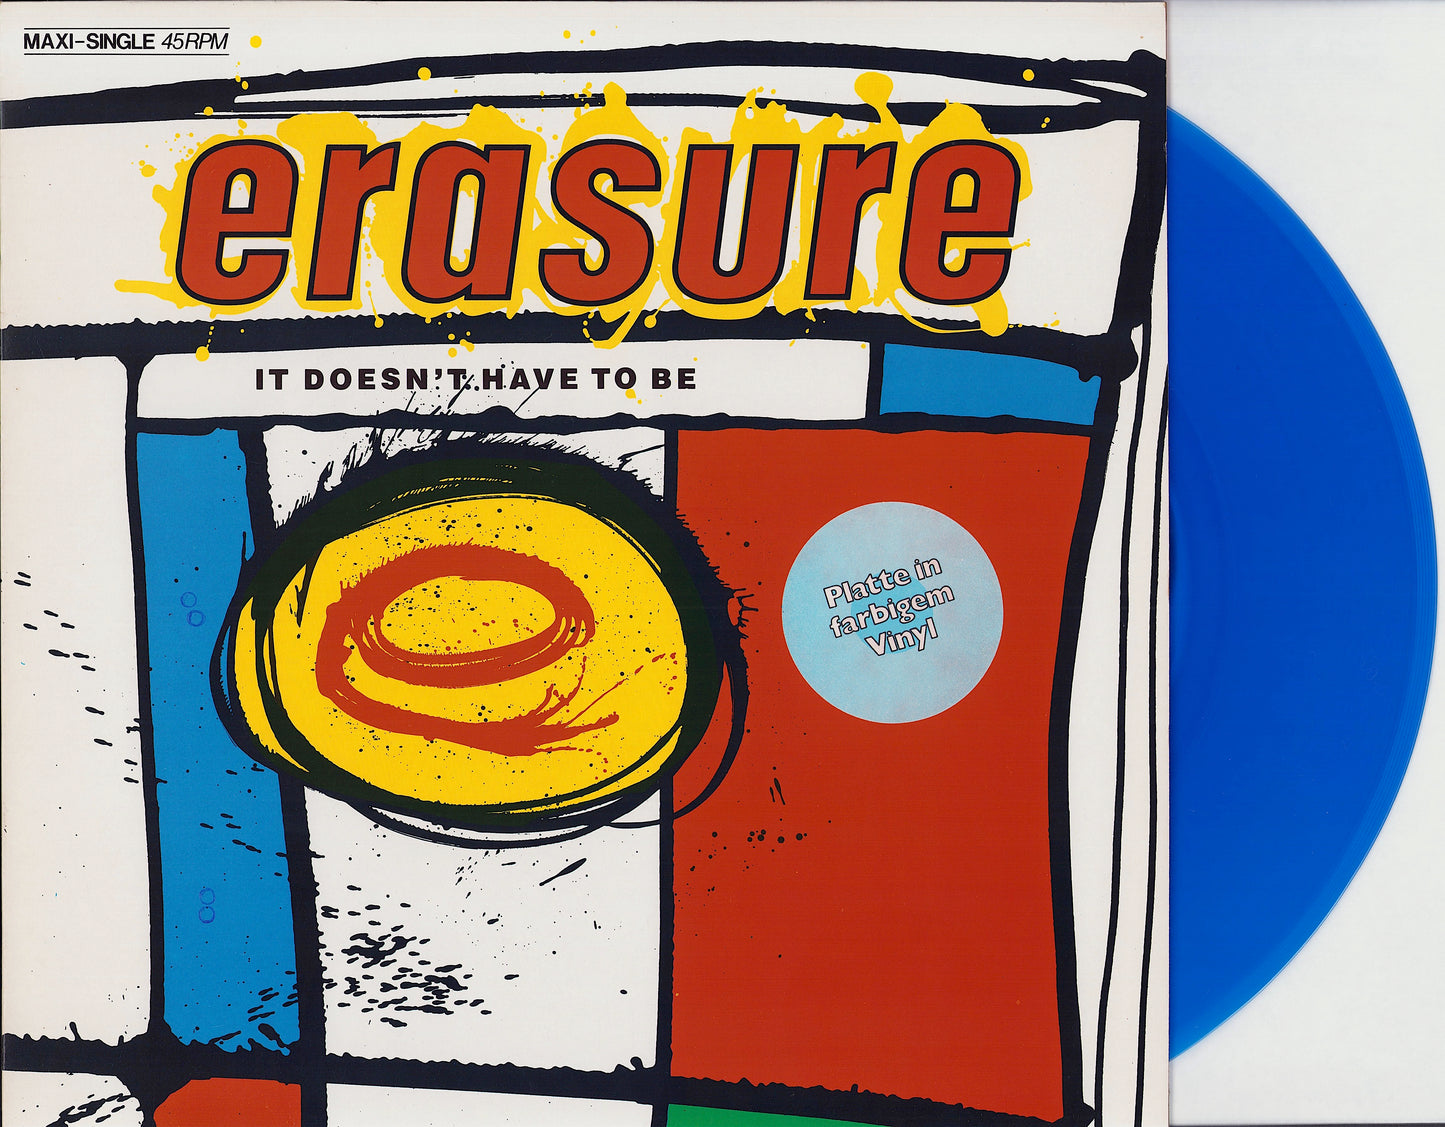 Erasure ‎- It Doesn't Have To Be (Blue Vinyl 12")